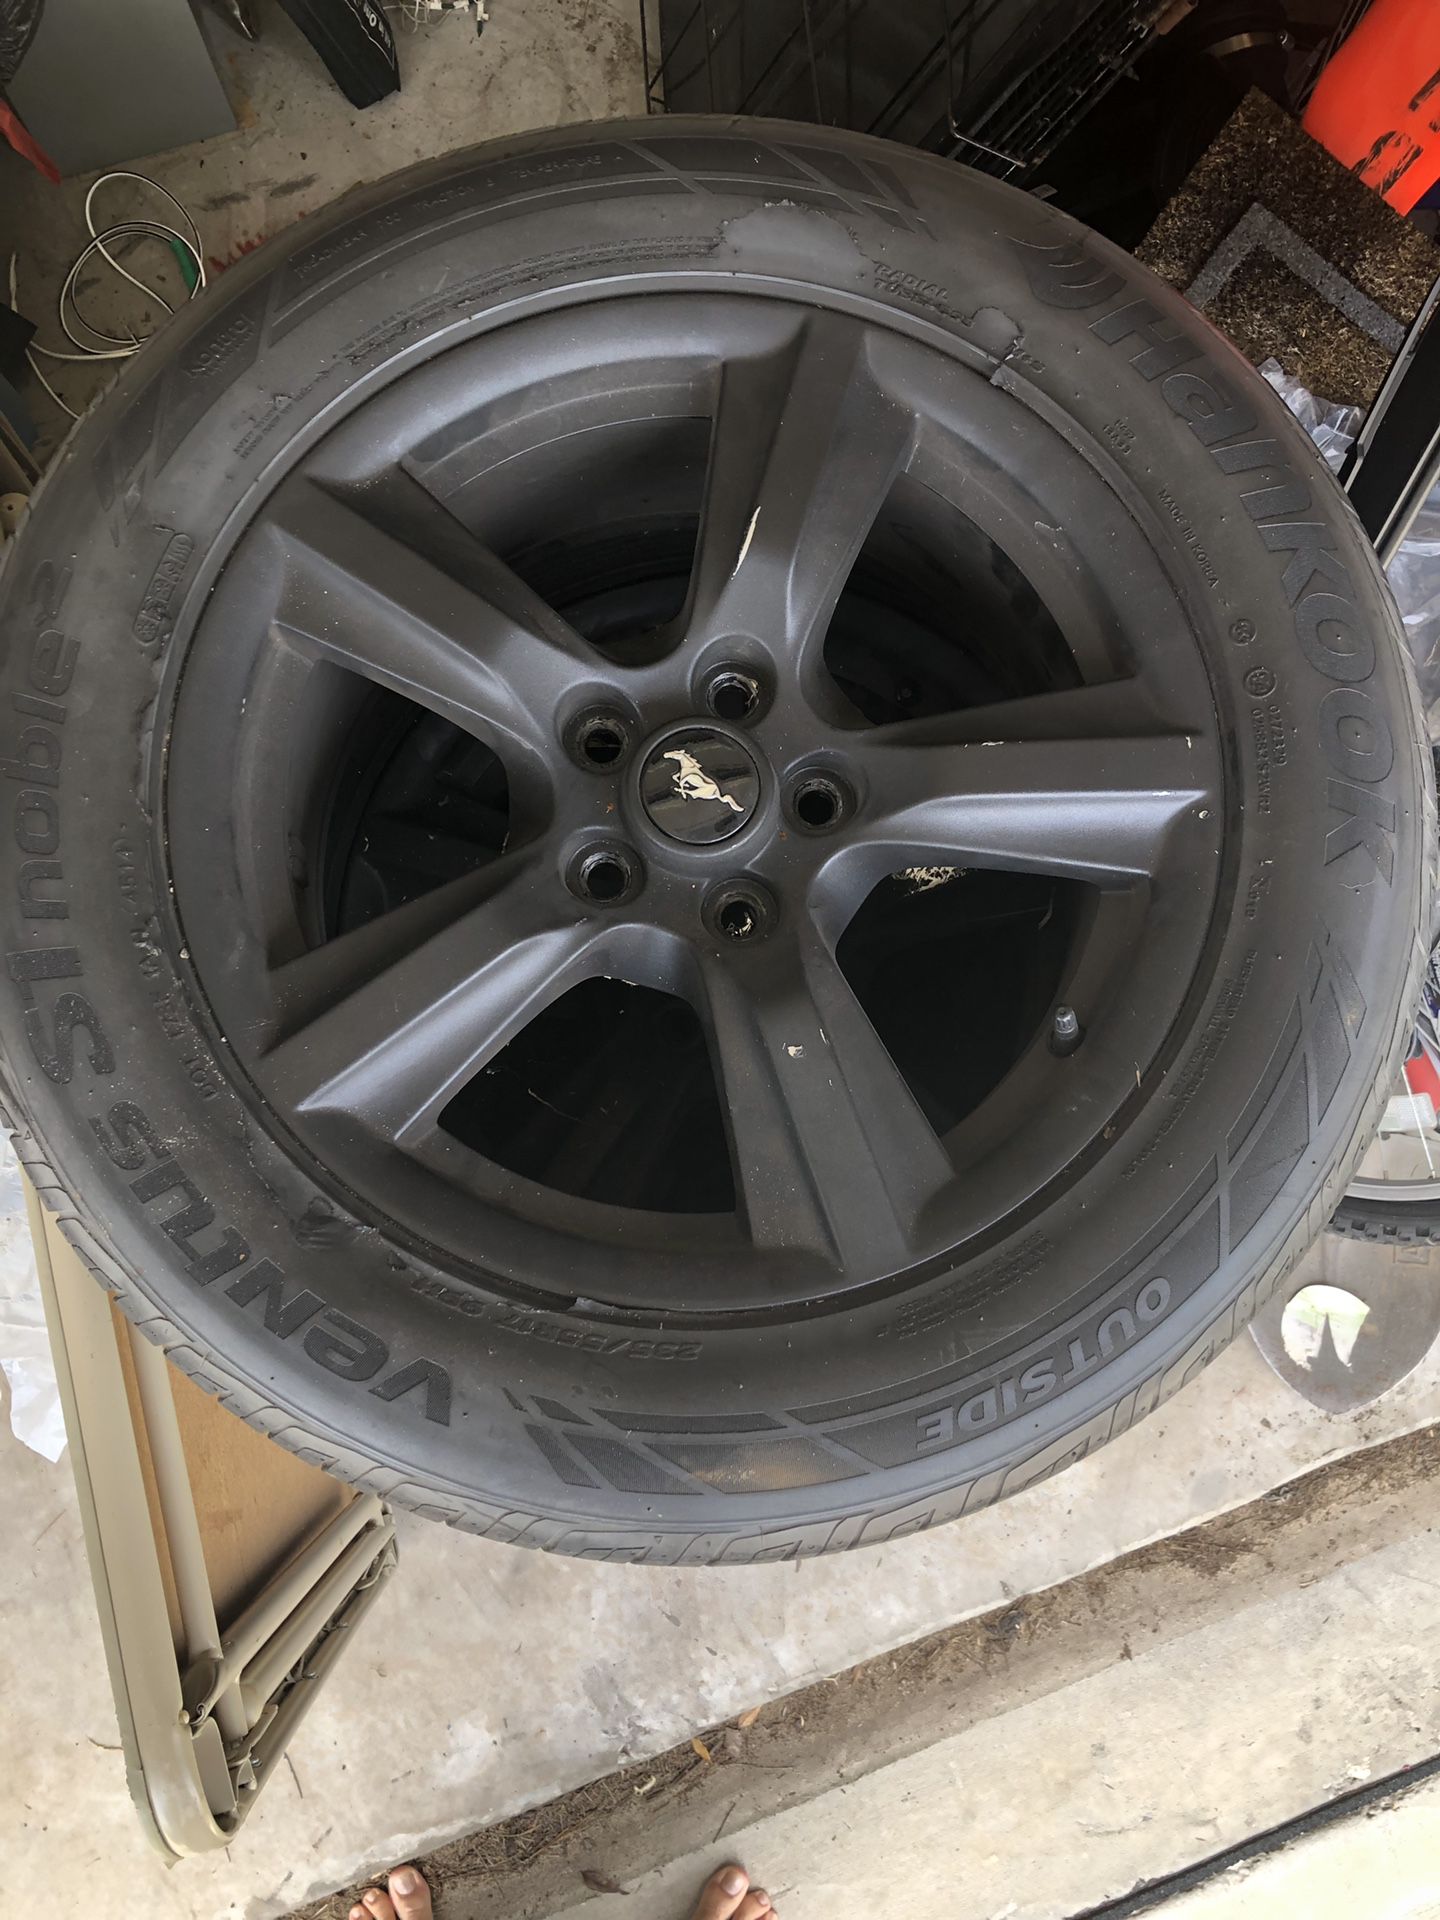 17” Ford Mustang OEM rims and tires